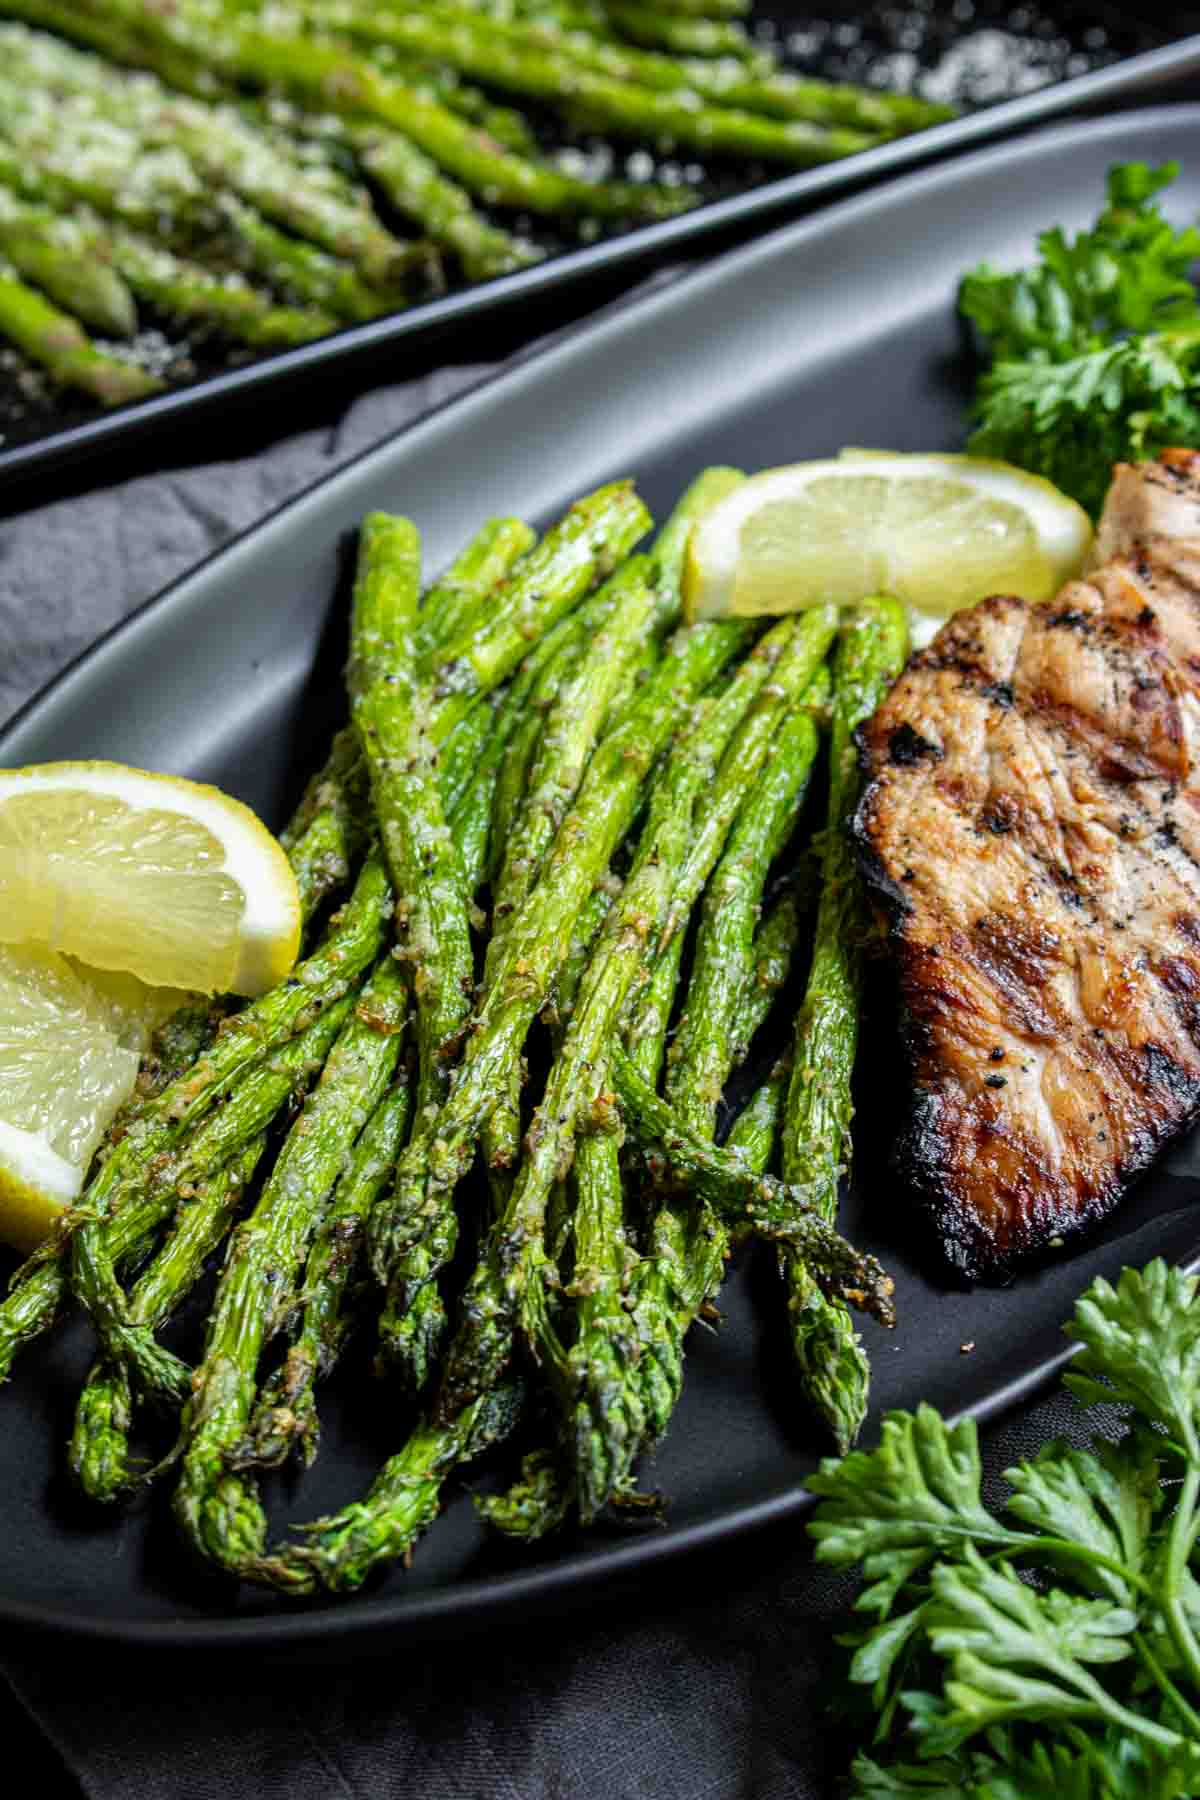 Grilled chicken breast with lemon and a side of Air Fryer Asparagus on a black plate.